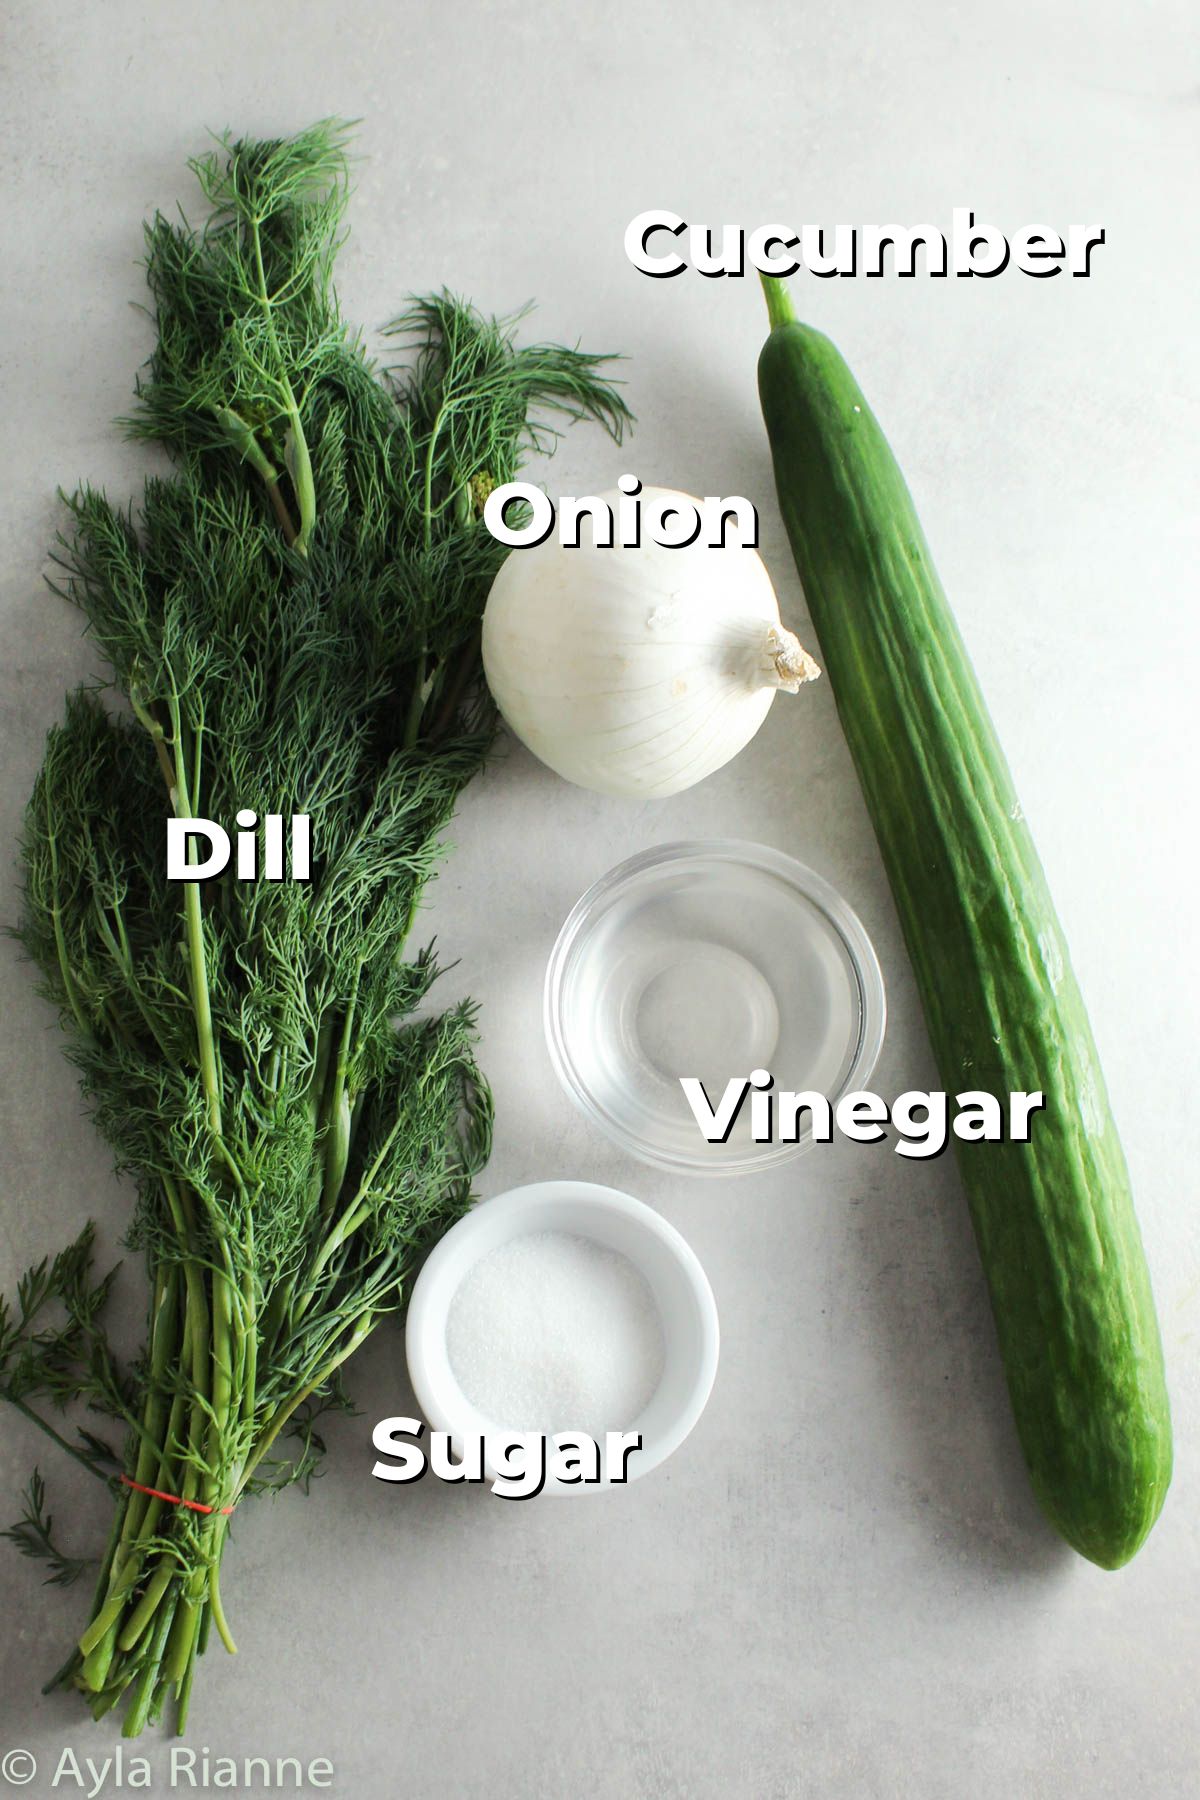 ingredients for cucumber dill salad including dill, onion, vinegar, sugar, and a cucumber